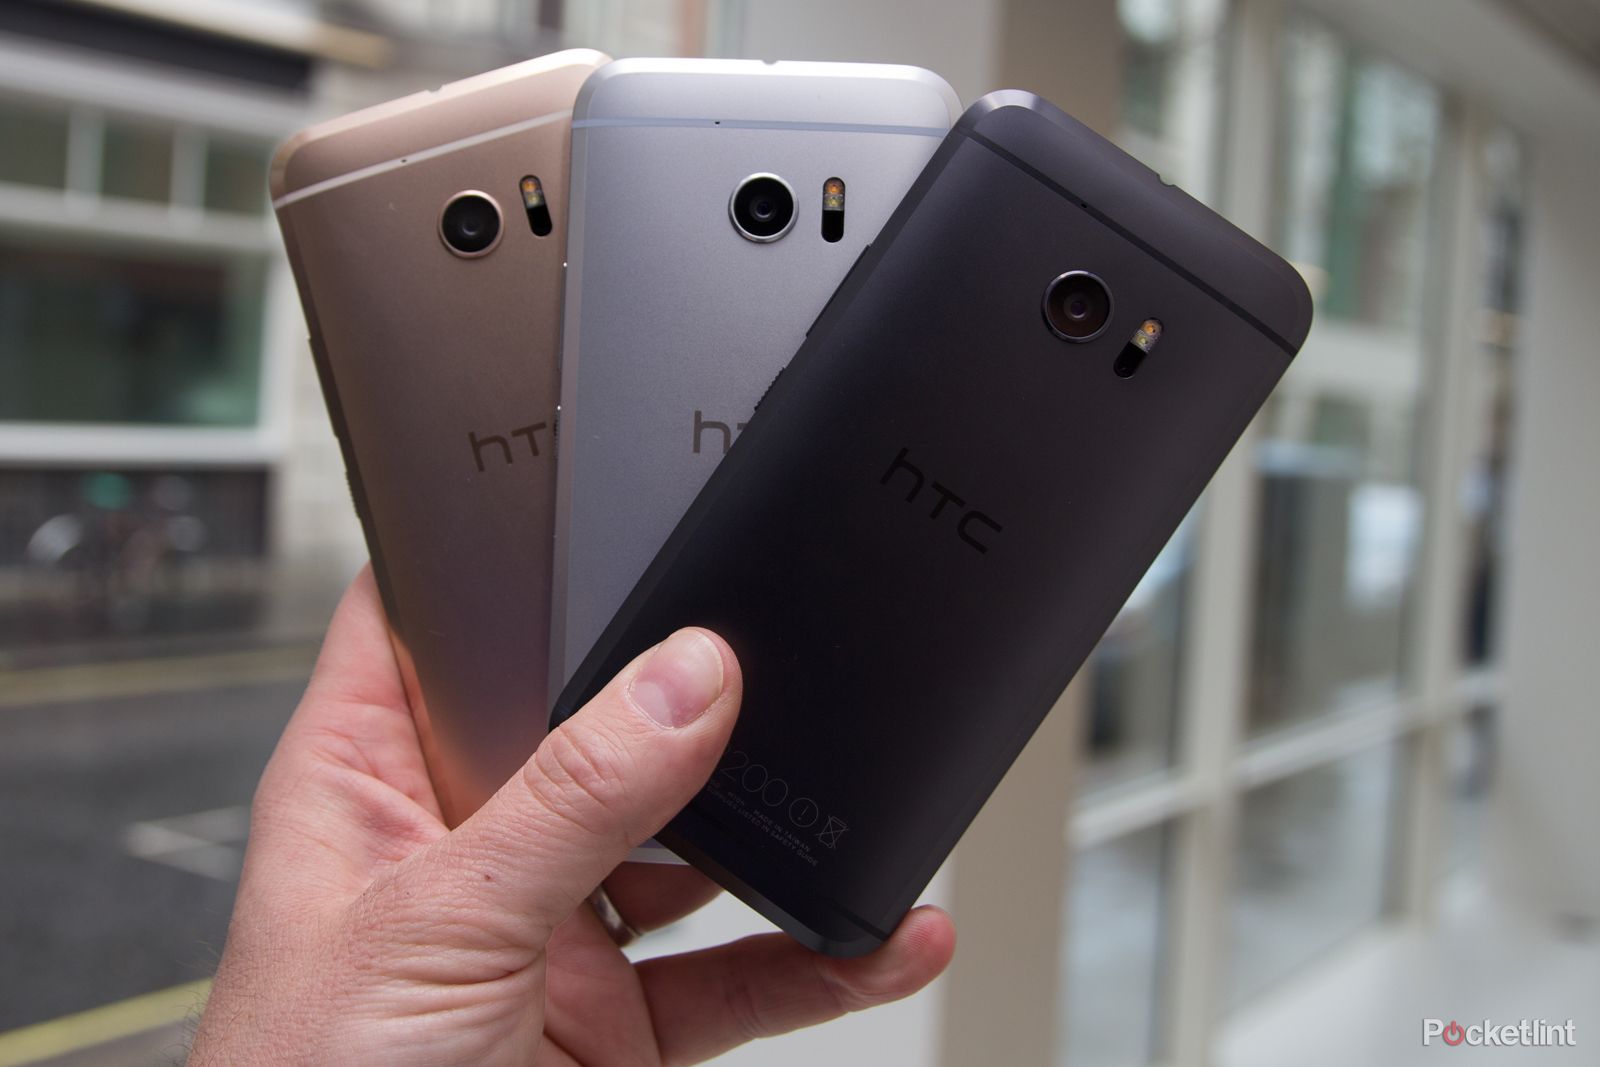 HTC announces another big loss, plans to ditch cheap phones